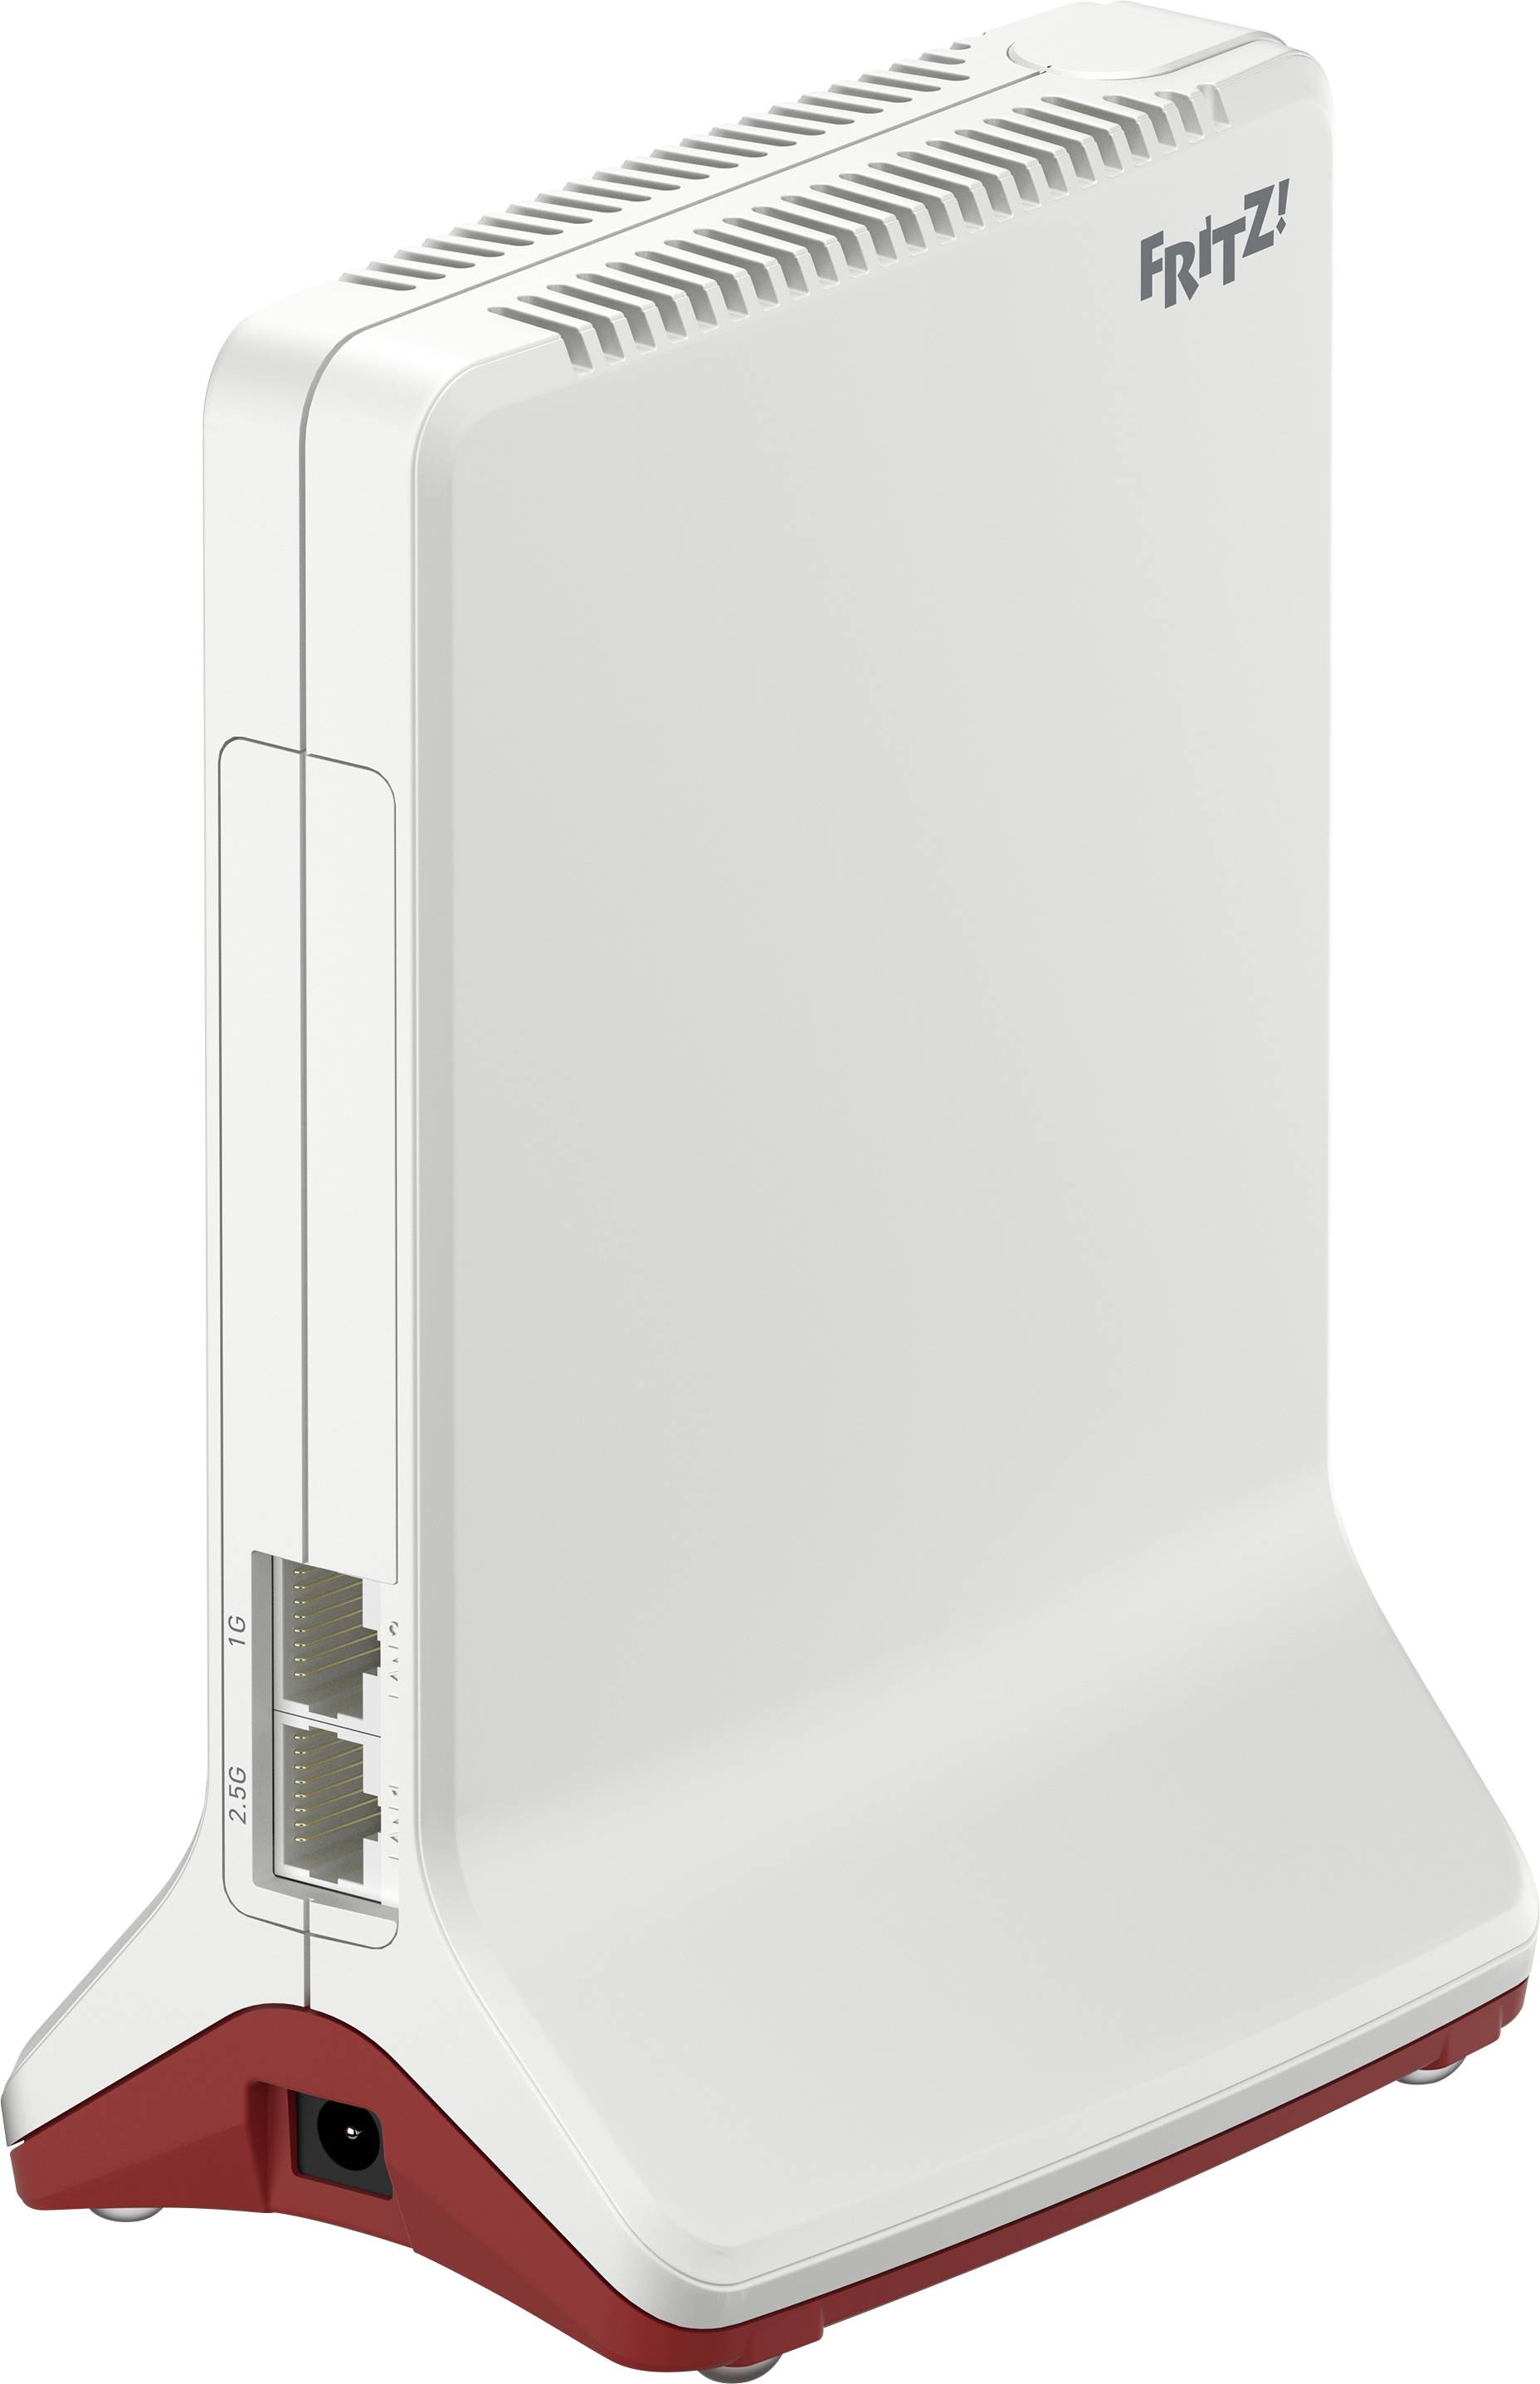 AVM FRITZ!Repeater 6000 Wi-Fi repeater 6000 MBit/s 2.4 GHz, 5 GHz, 5 Mesh support | Conrad.com